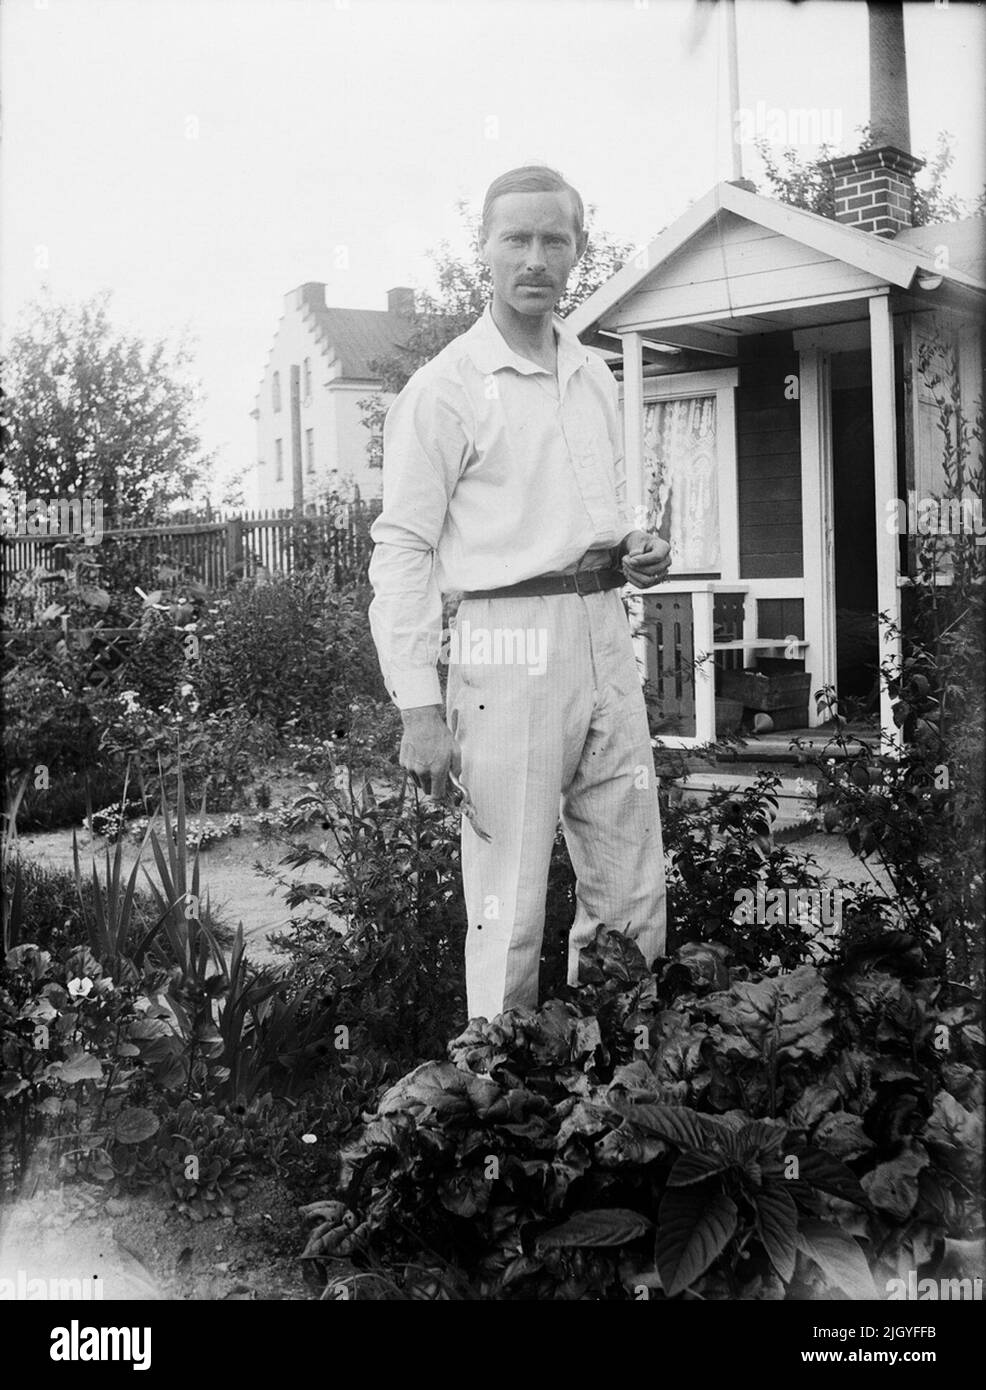 Probably Josef Ärnström at the family's colonial cottage, the present neighborhood Luthagsstranden, Luthagen, Uppsala. In the background, the horse's shoe factory (AB L. E. Larsson & Co) is glimpsed. Kolonistugan was later moved to Norrlandsgatan 39, Uppsala, where Nora Ärnström, Josef Ärnström's widow, built a villa in 1929.josef Ärnström's image collection was acquired by Upplandsmuseet 2011.josef Erstström Was Was Varnström Was Was Varnström Was Was Was Was Was Was Bed 18 Holded, Hållnäs parish, Uppland. He was married to Nora Selldin, born in Timrå, Medelpad. Both Josef and his wife Nora t Stock Photo